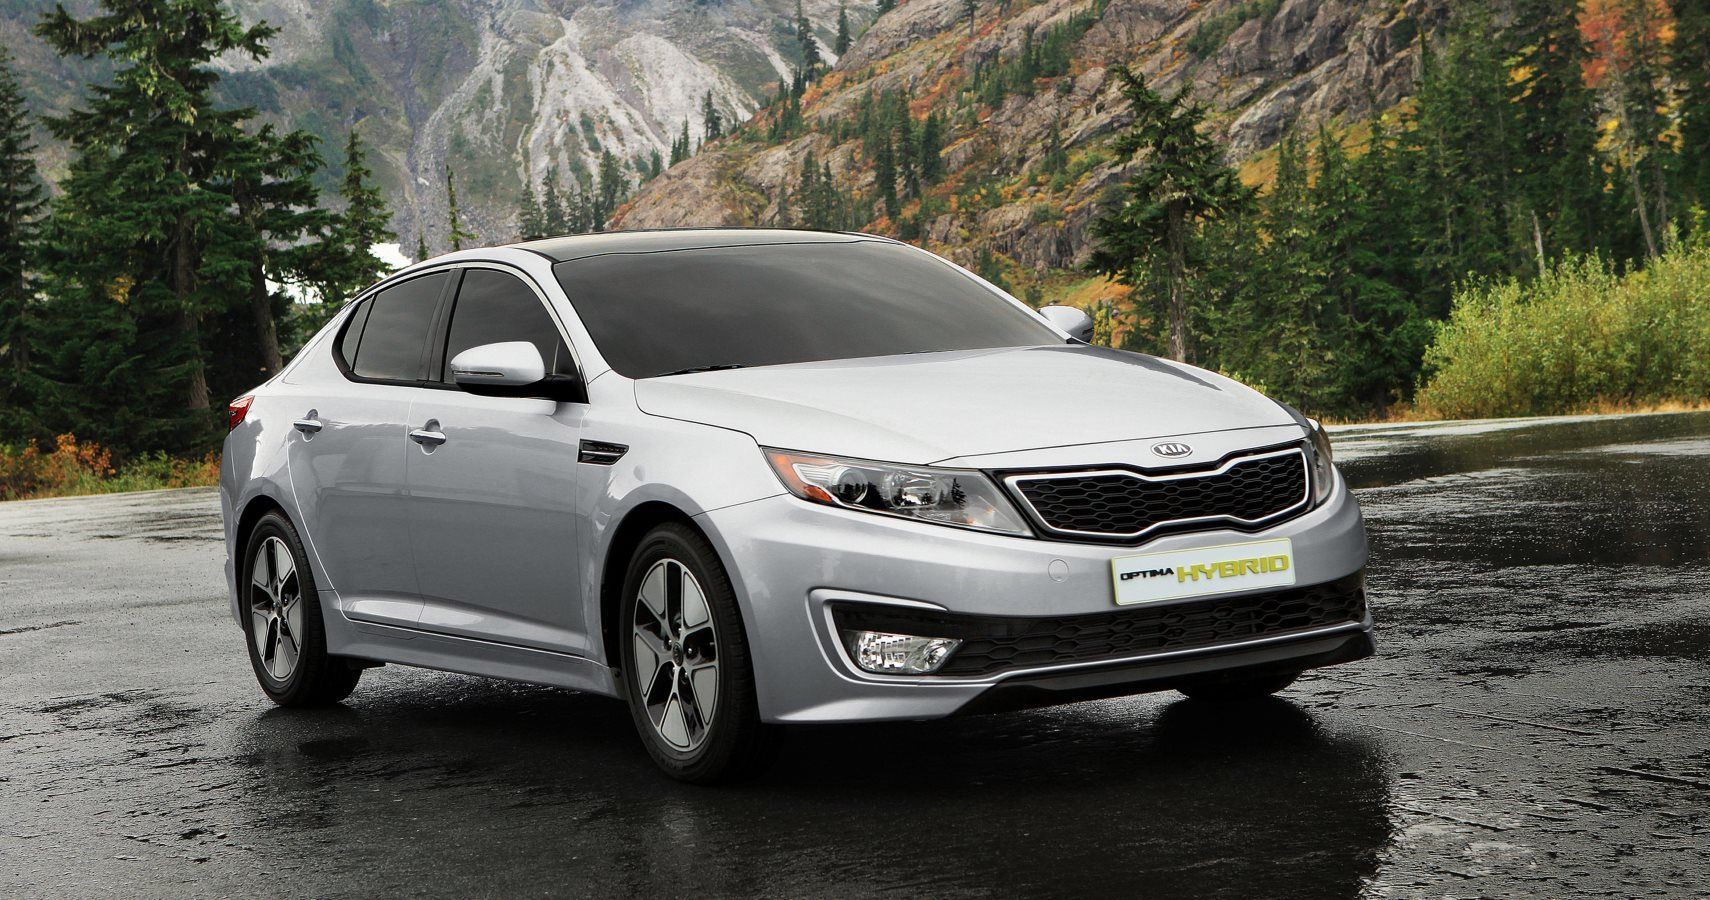 Kia Recalls Over 1 Million Cars For Airbag issue